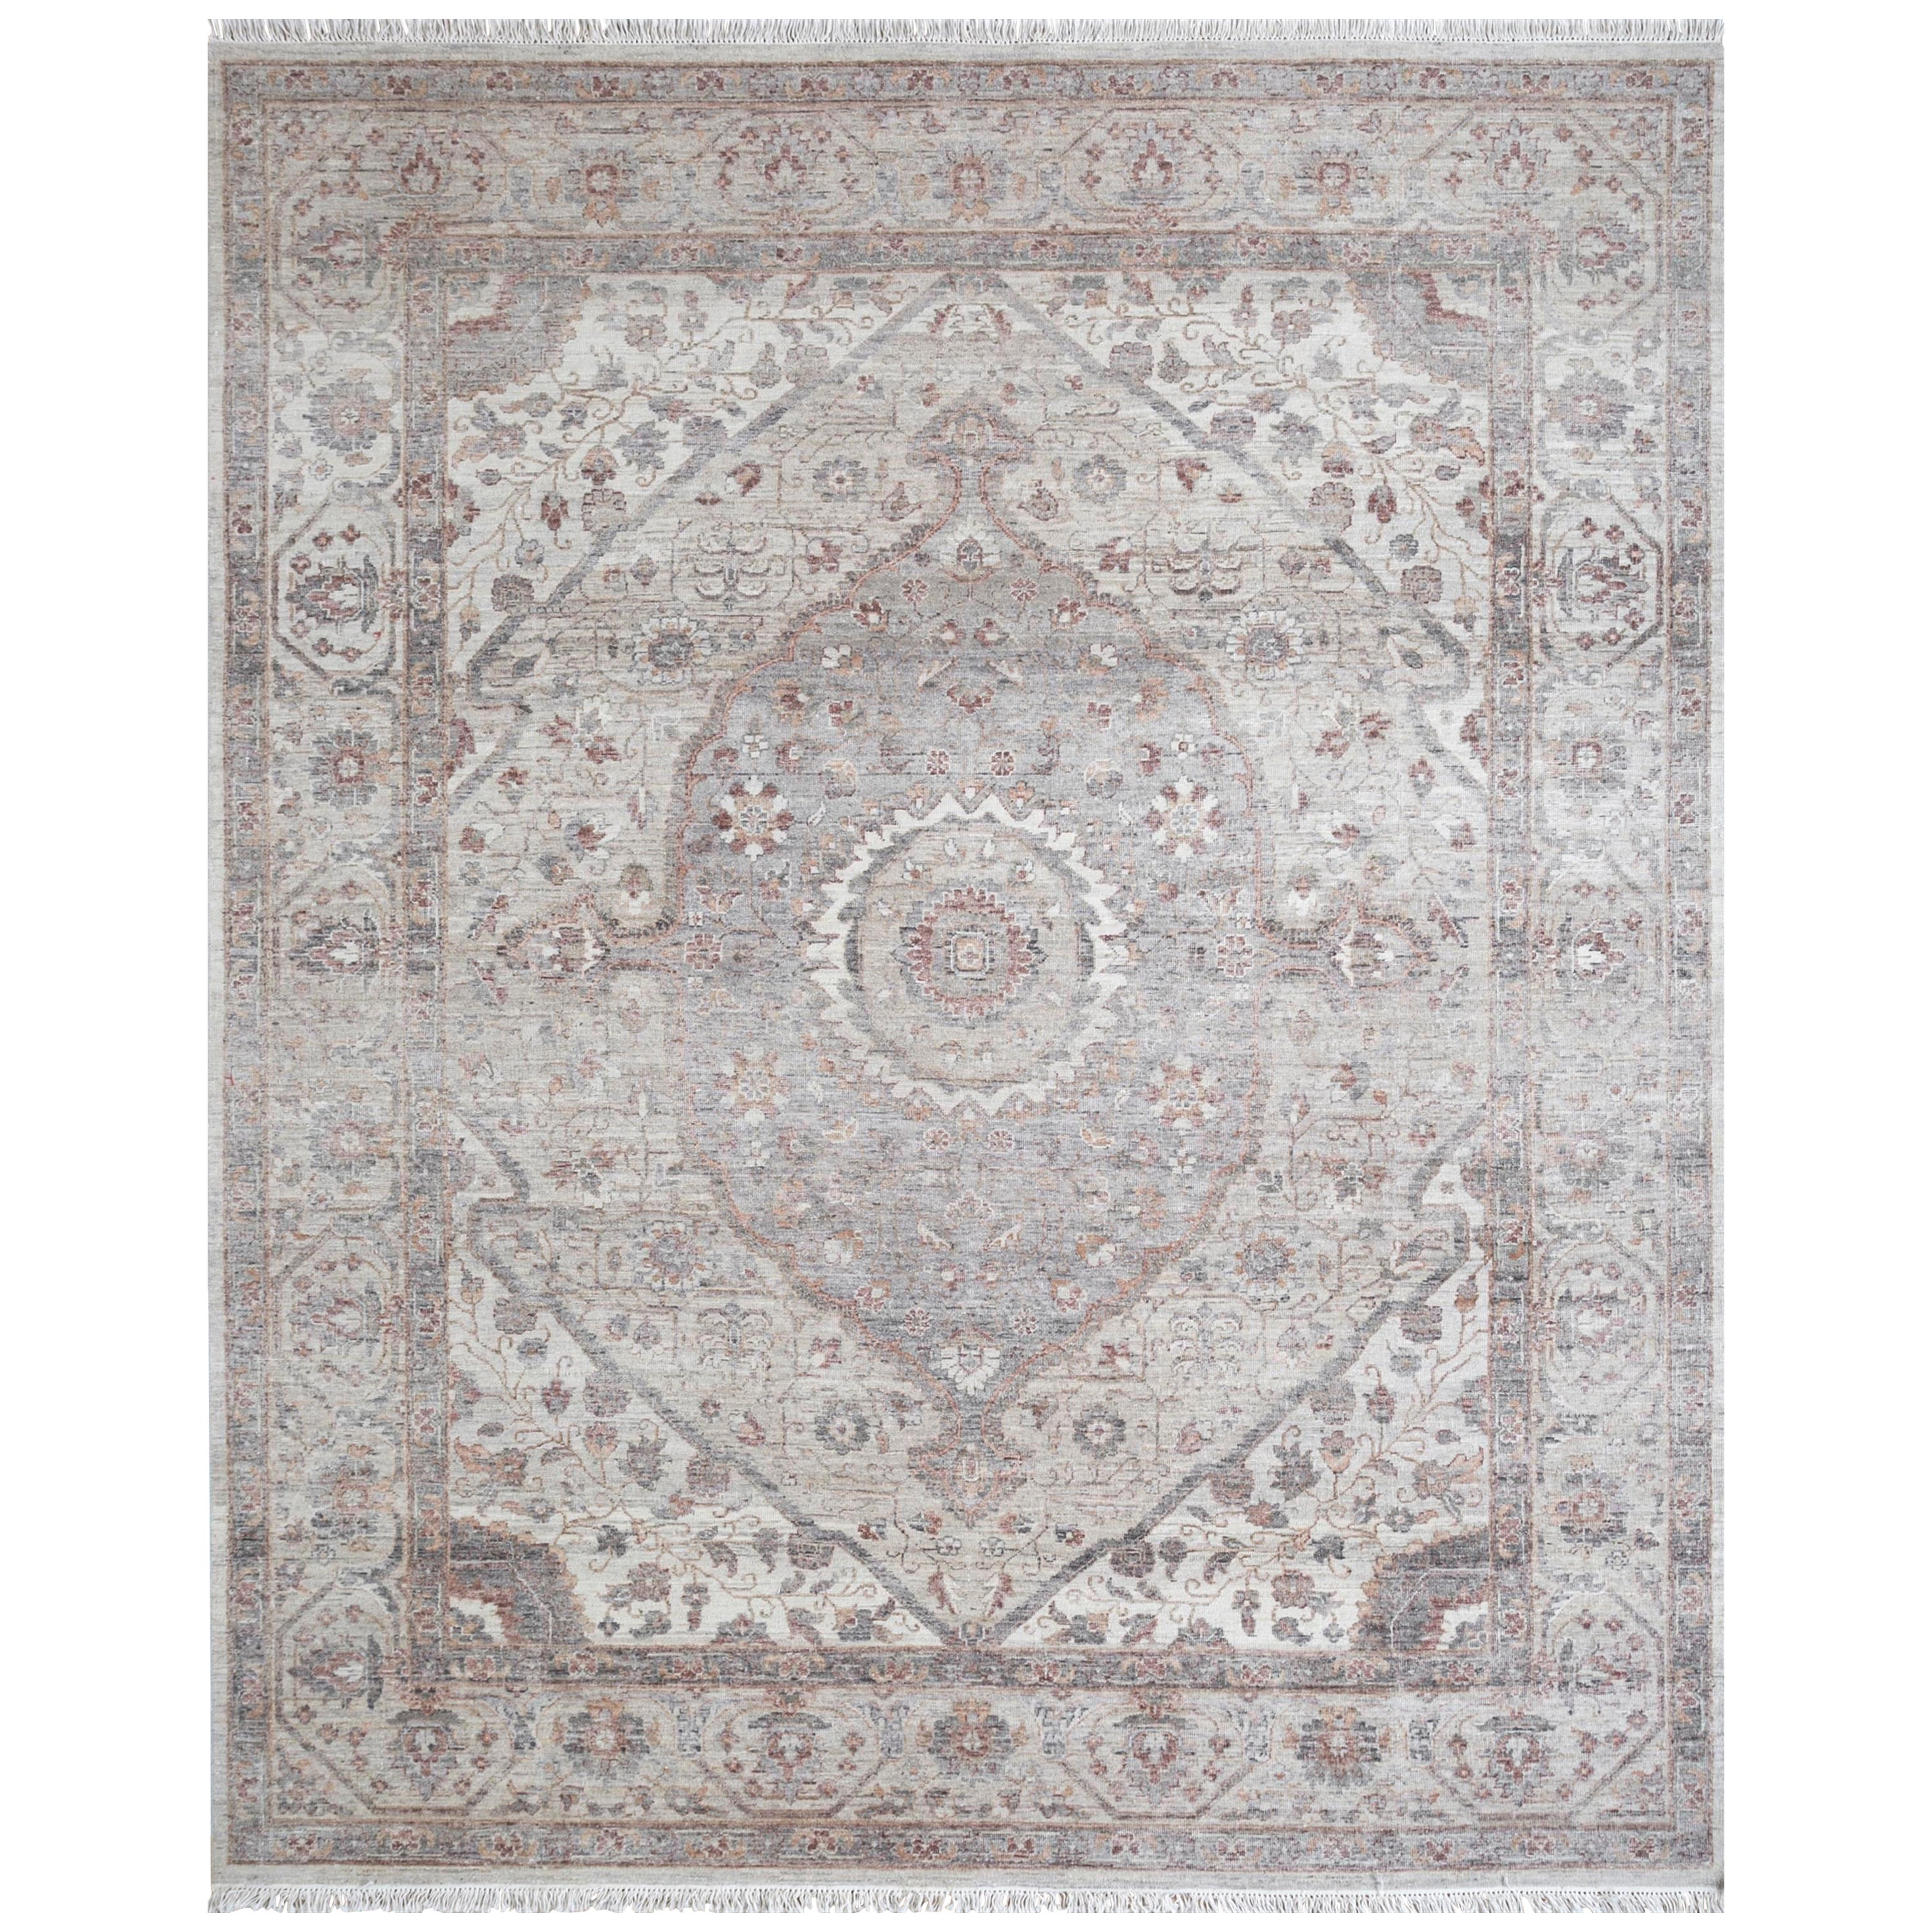 Vintage Whimsy Medium Taupe & Dark Ivory 300X420 cm Handknotted Rug For Sale